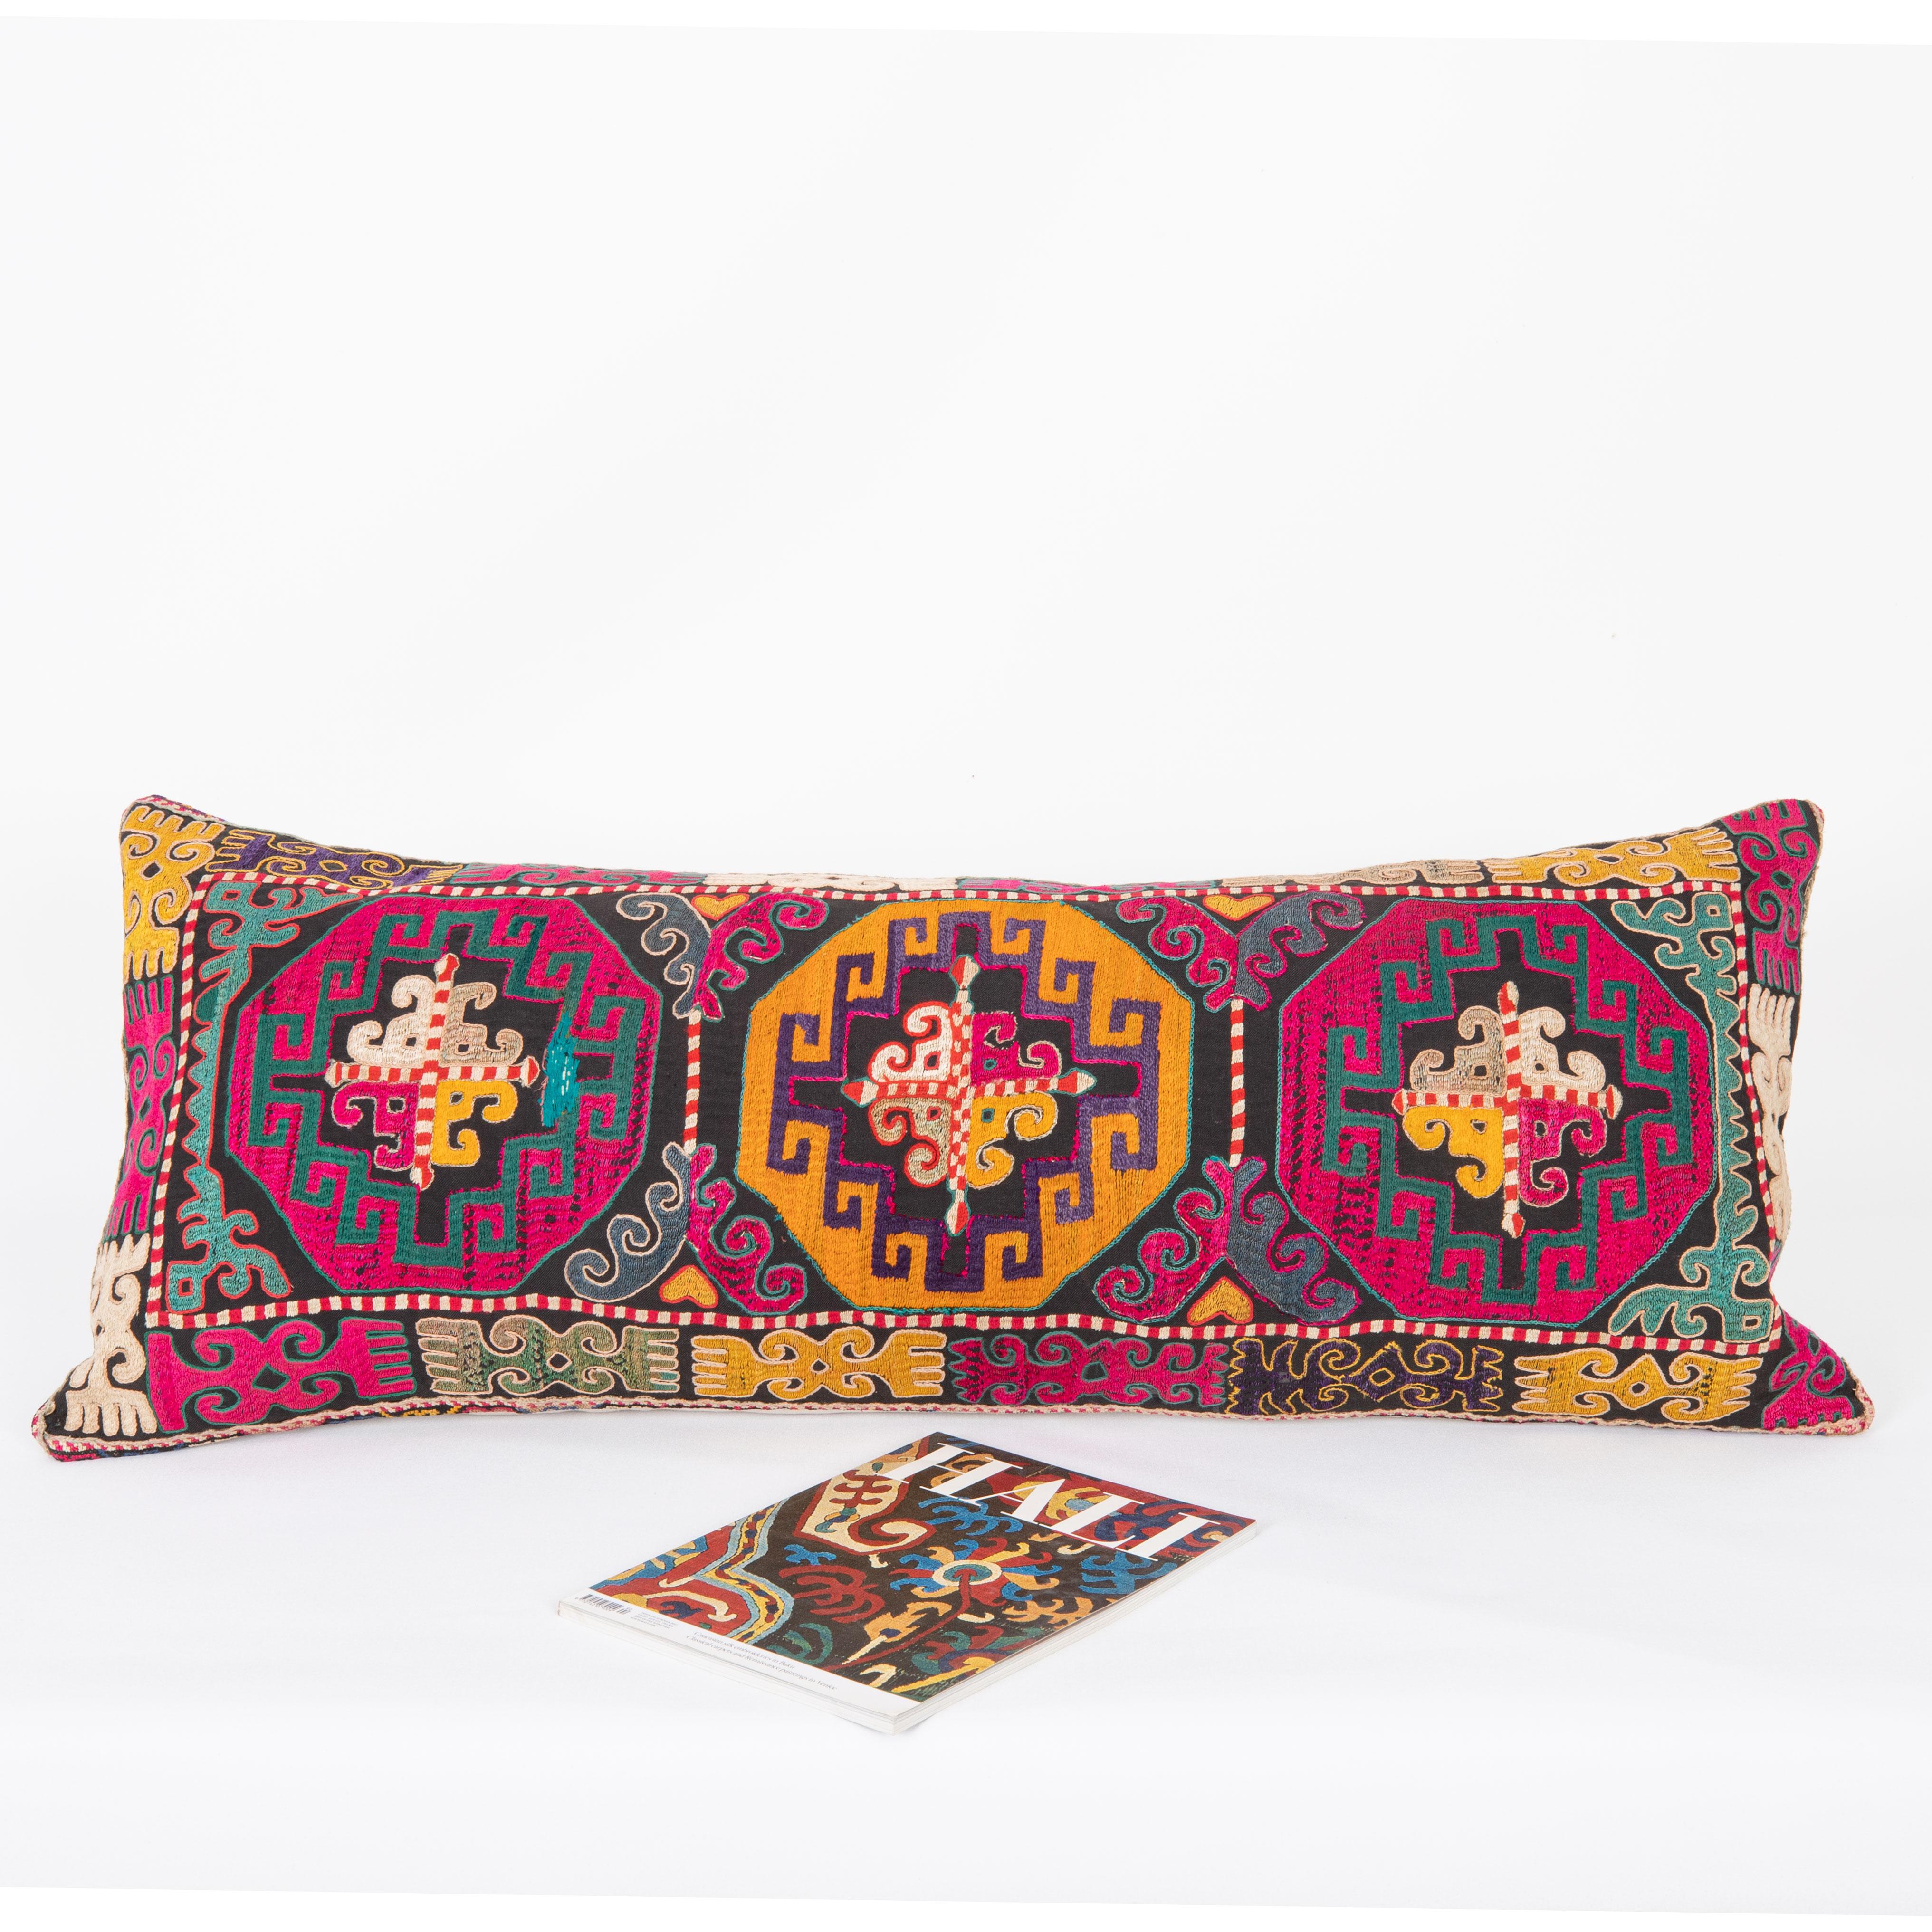 Suzani Pillow Cover, Made from a 1970s/80s silk mafrash ( storage bag ) Panels For Sale